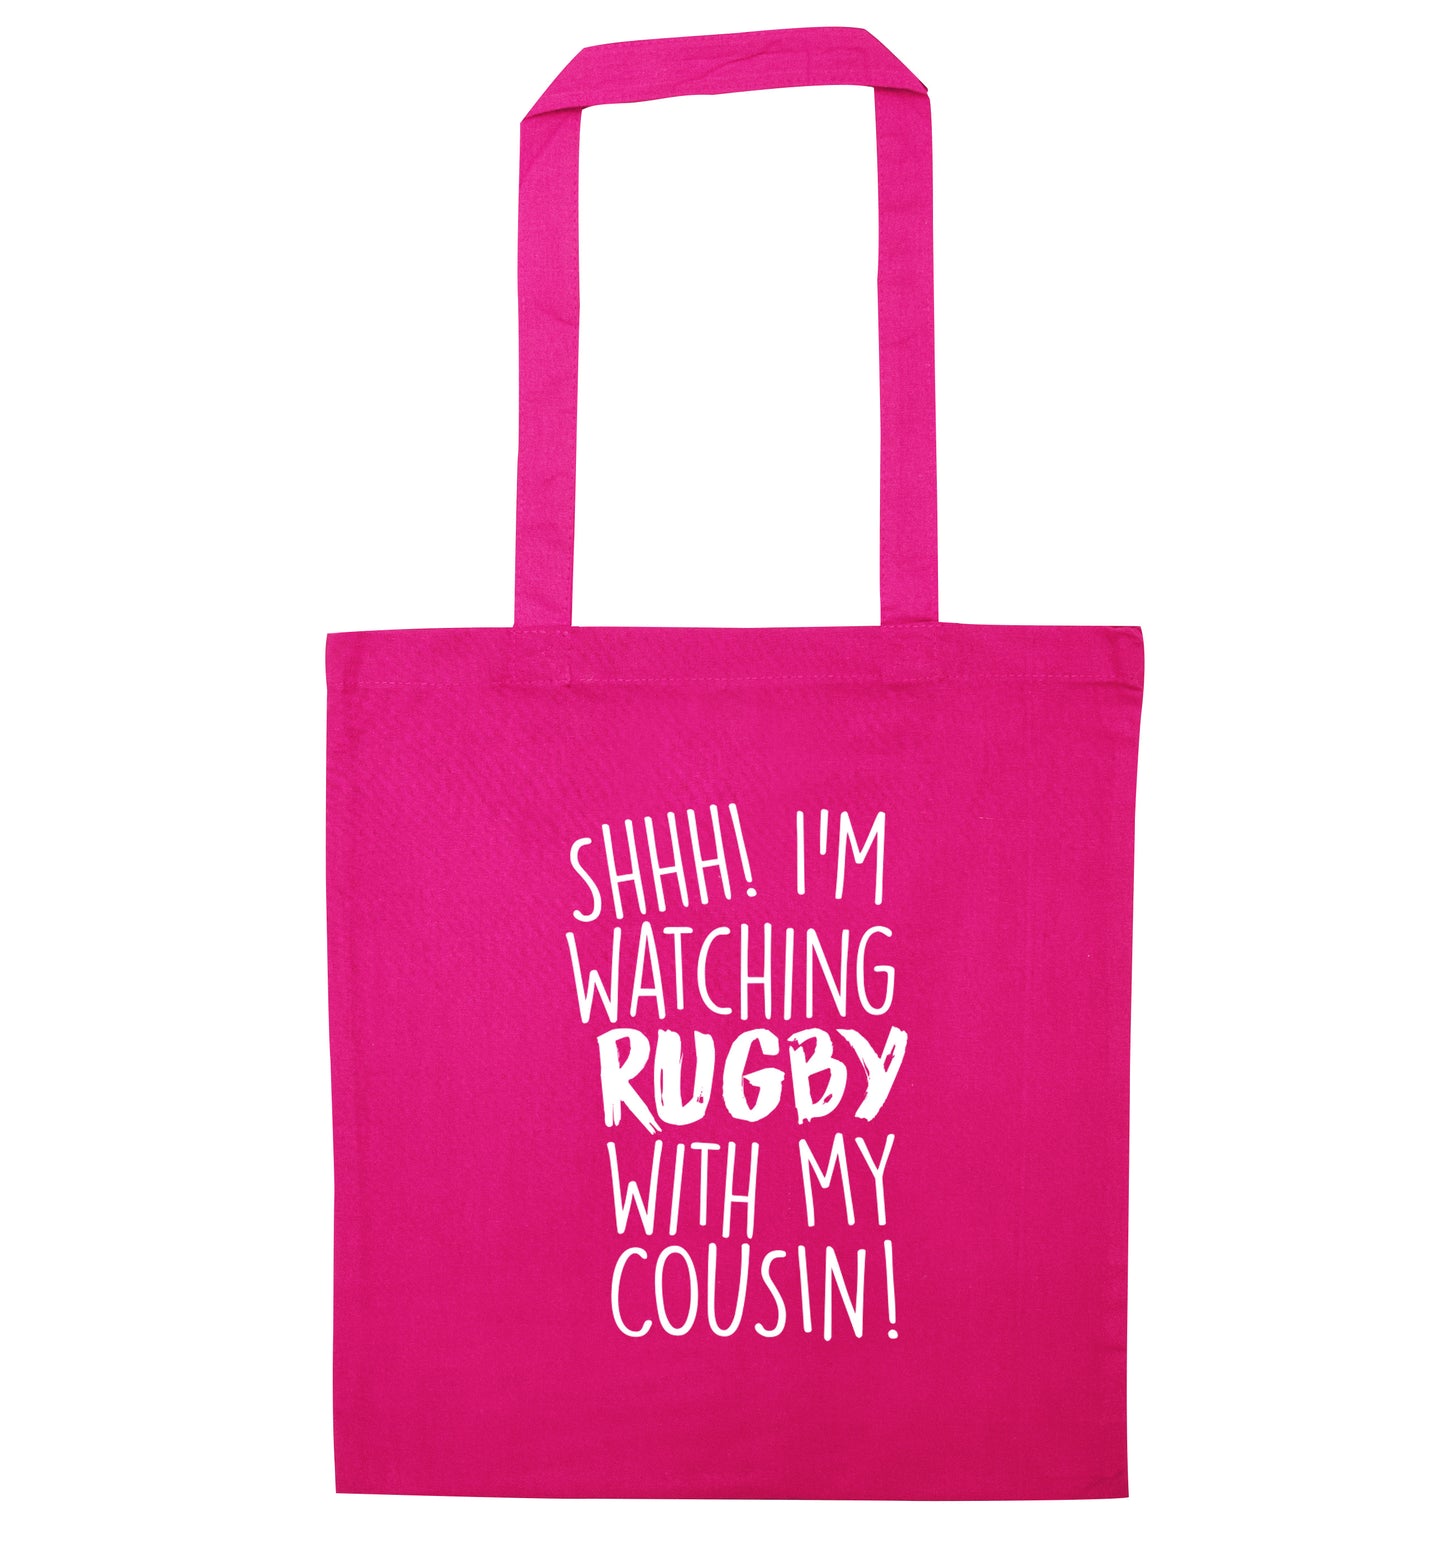 Shhh I'm watching rugby with my cousin pink tote bag